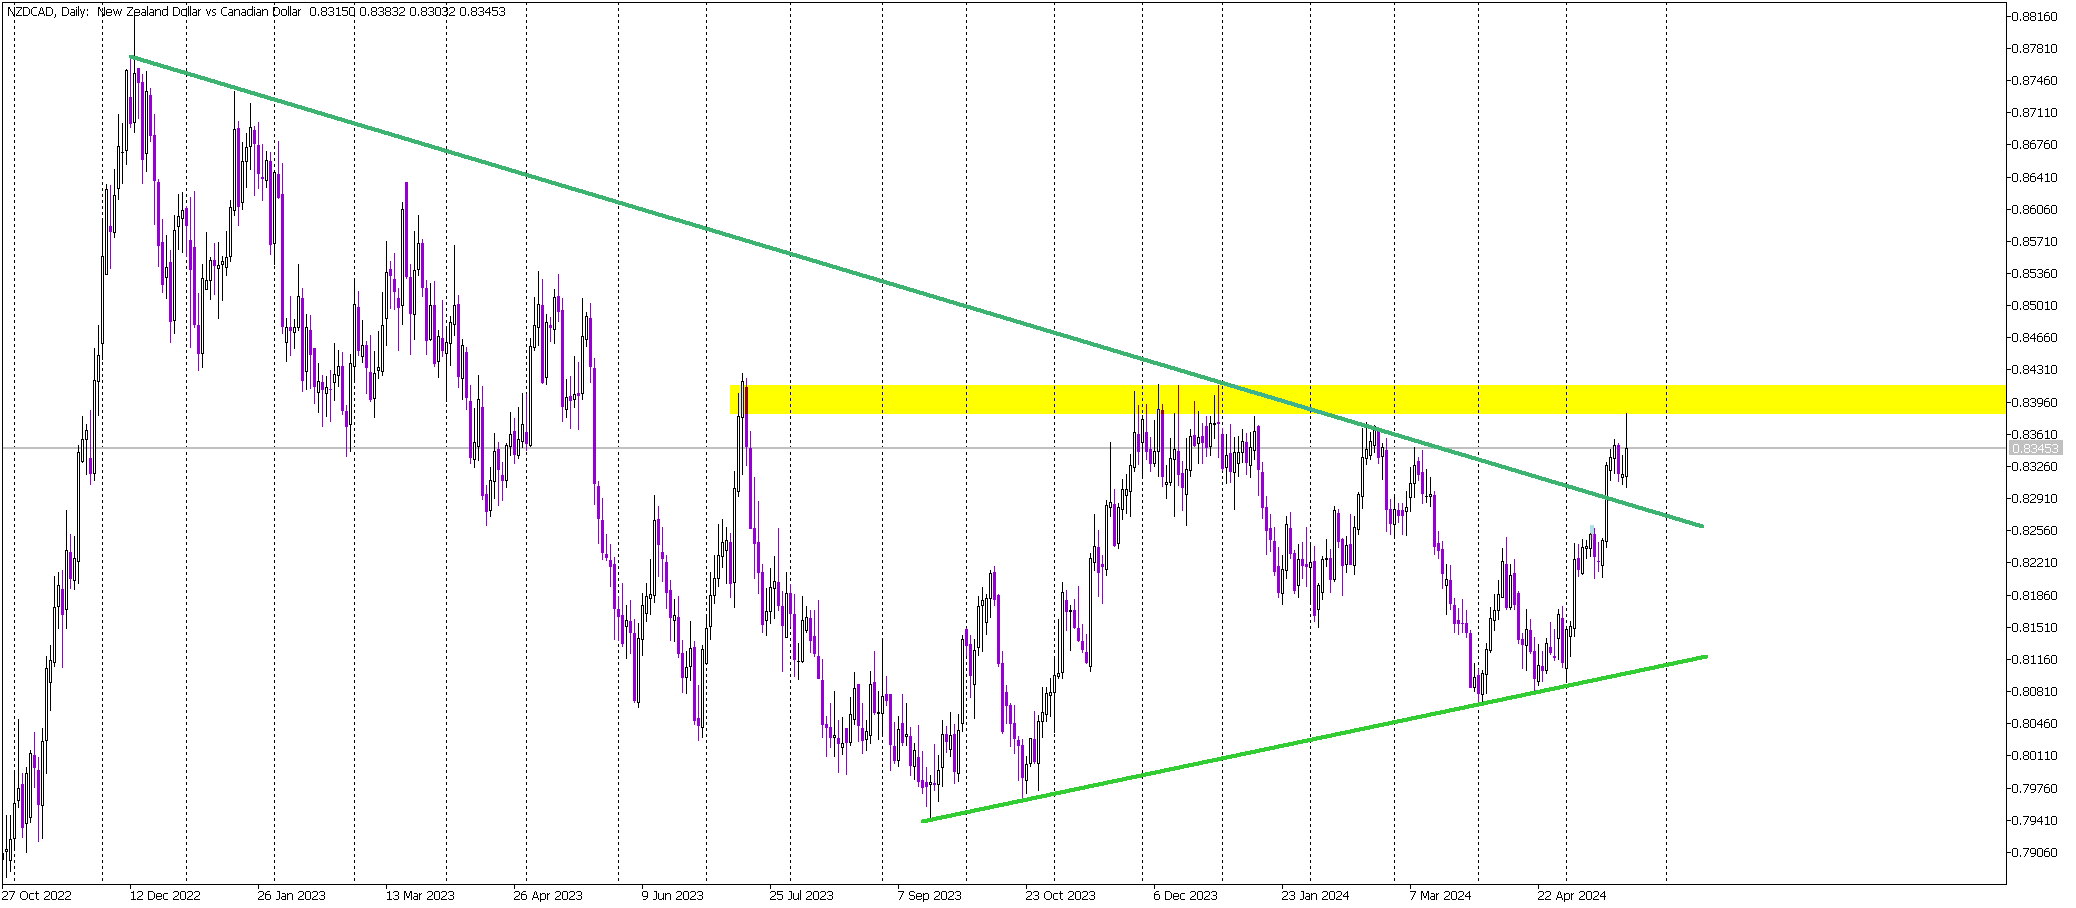 Market Forces Push NZD/CAD Higher, But Resistance Looms